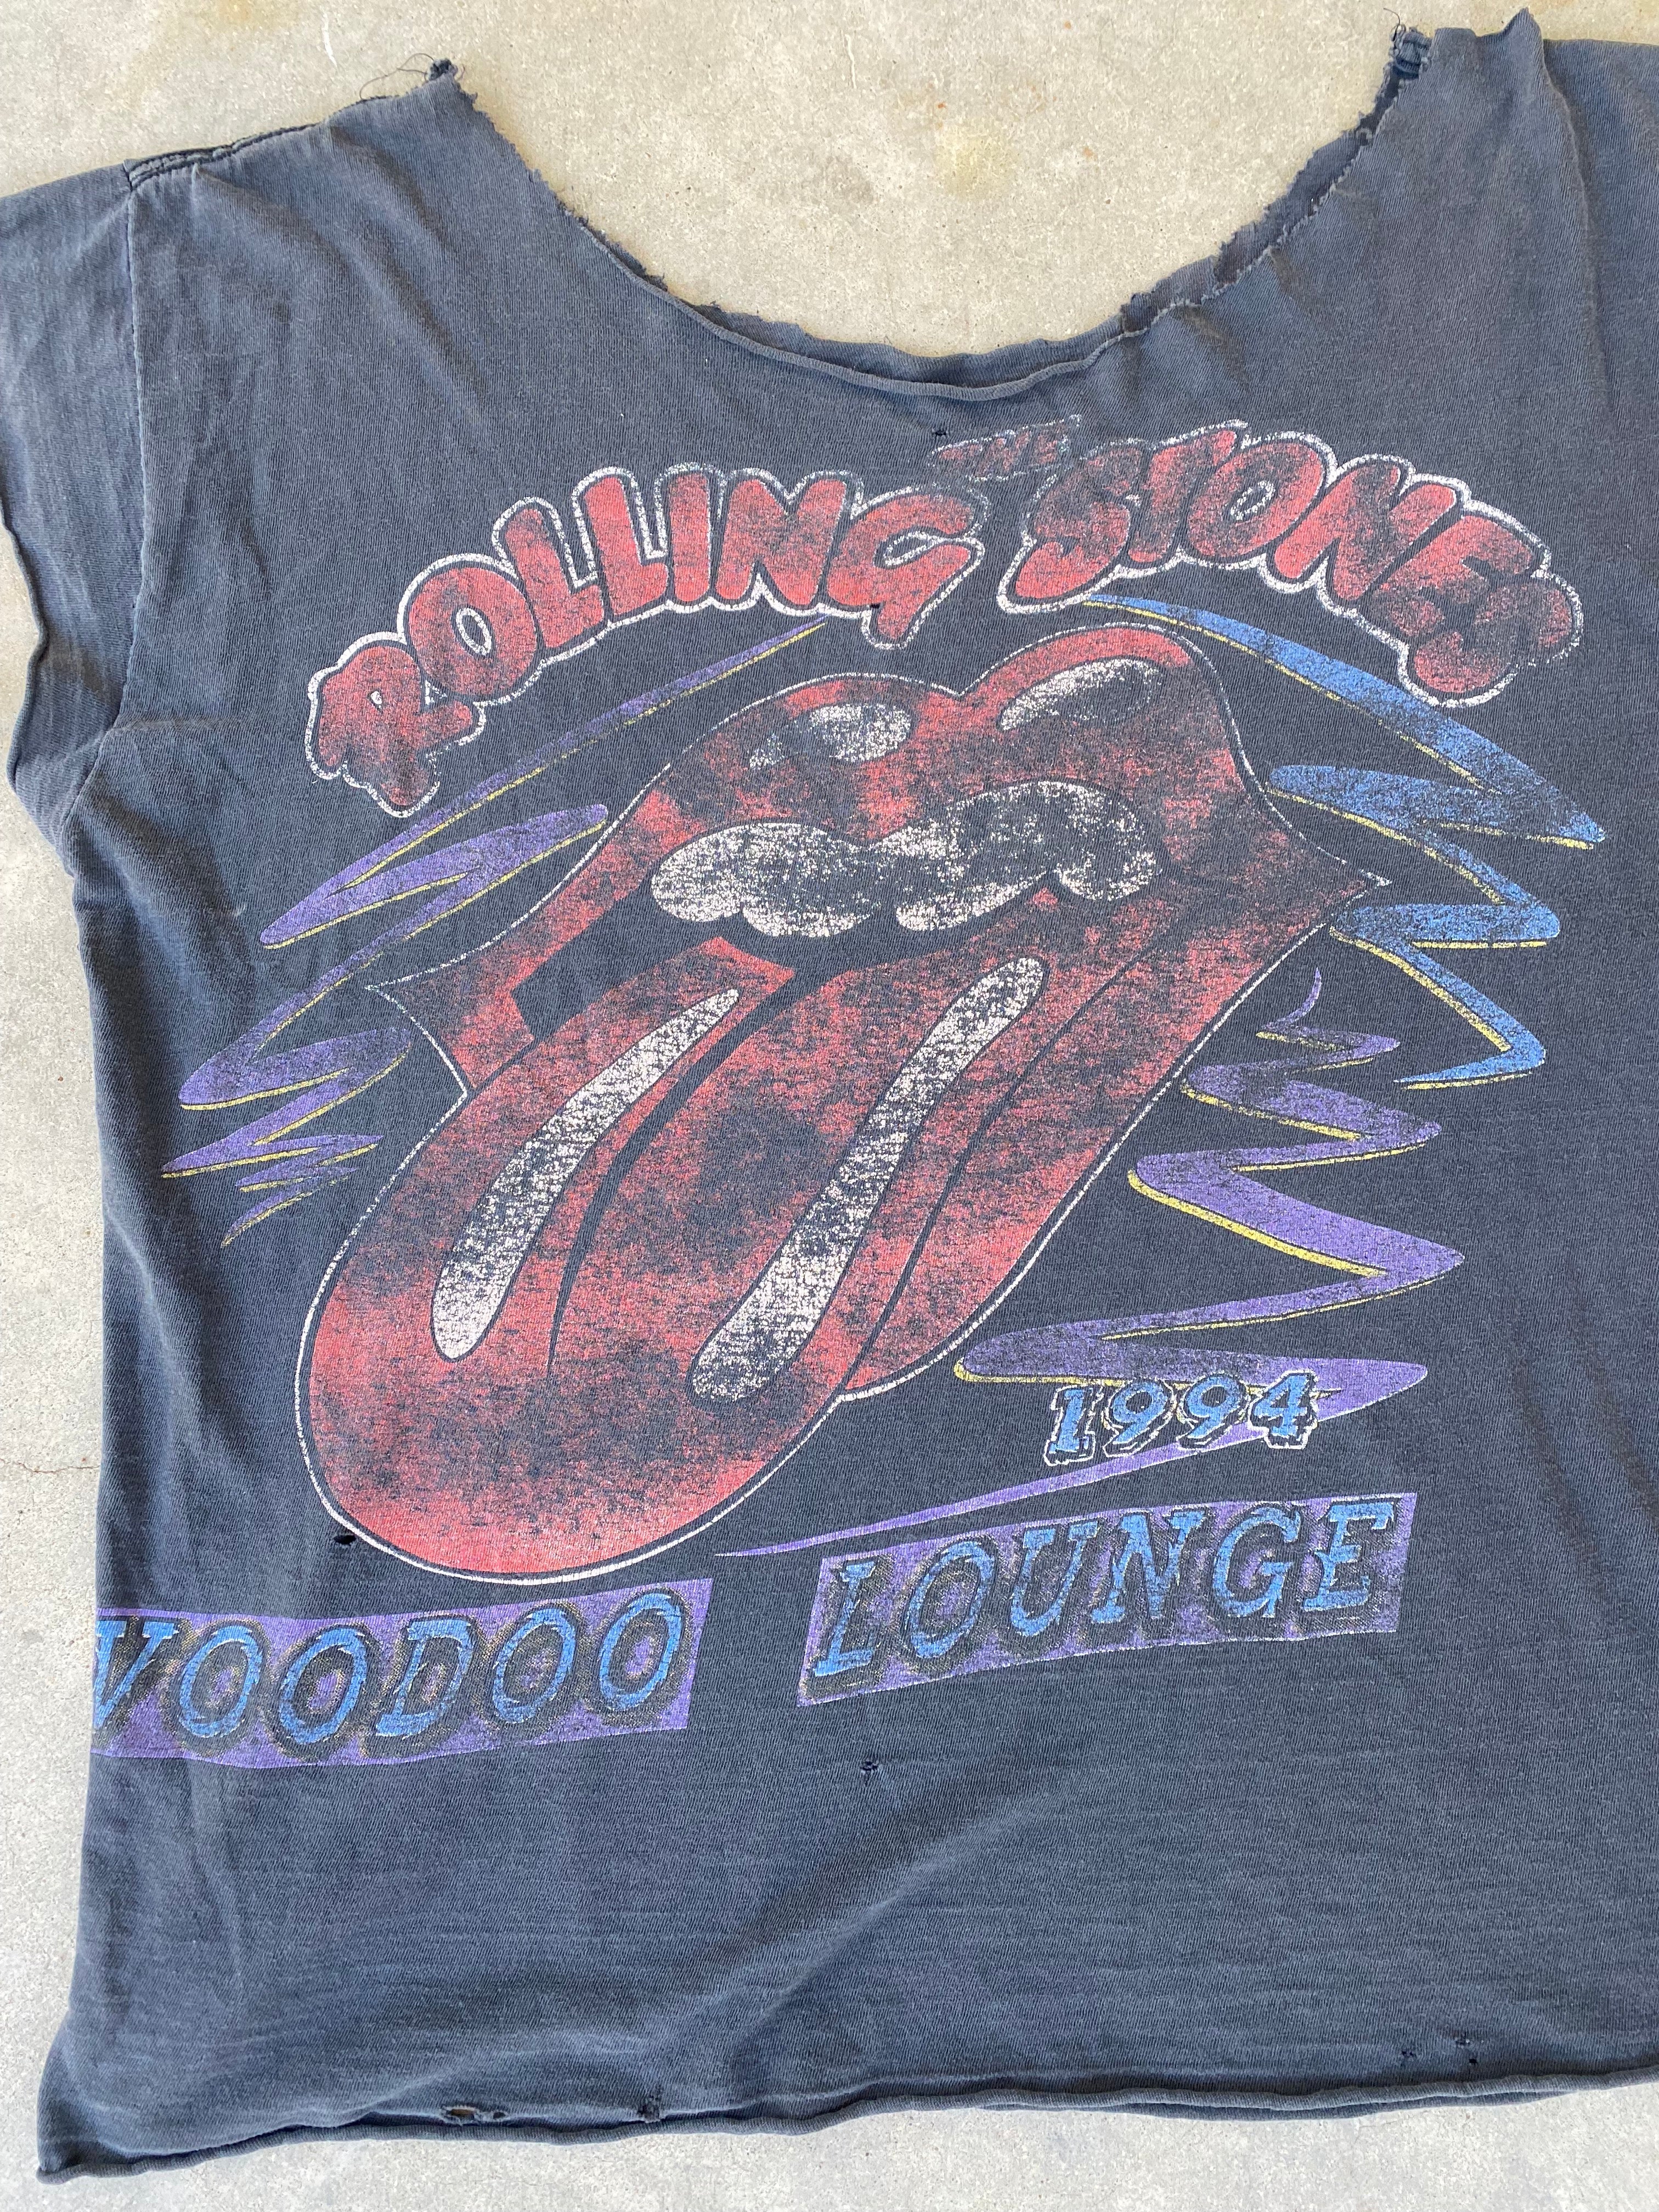 1994 Rolling Stones Voodoo Lounge Cropped Shirt (XL)